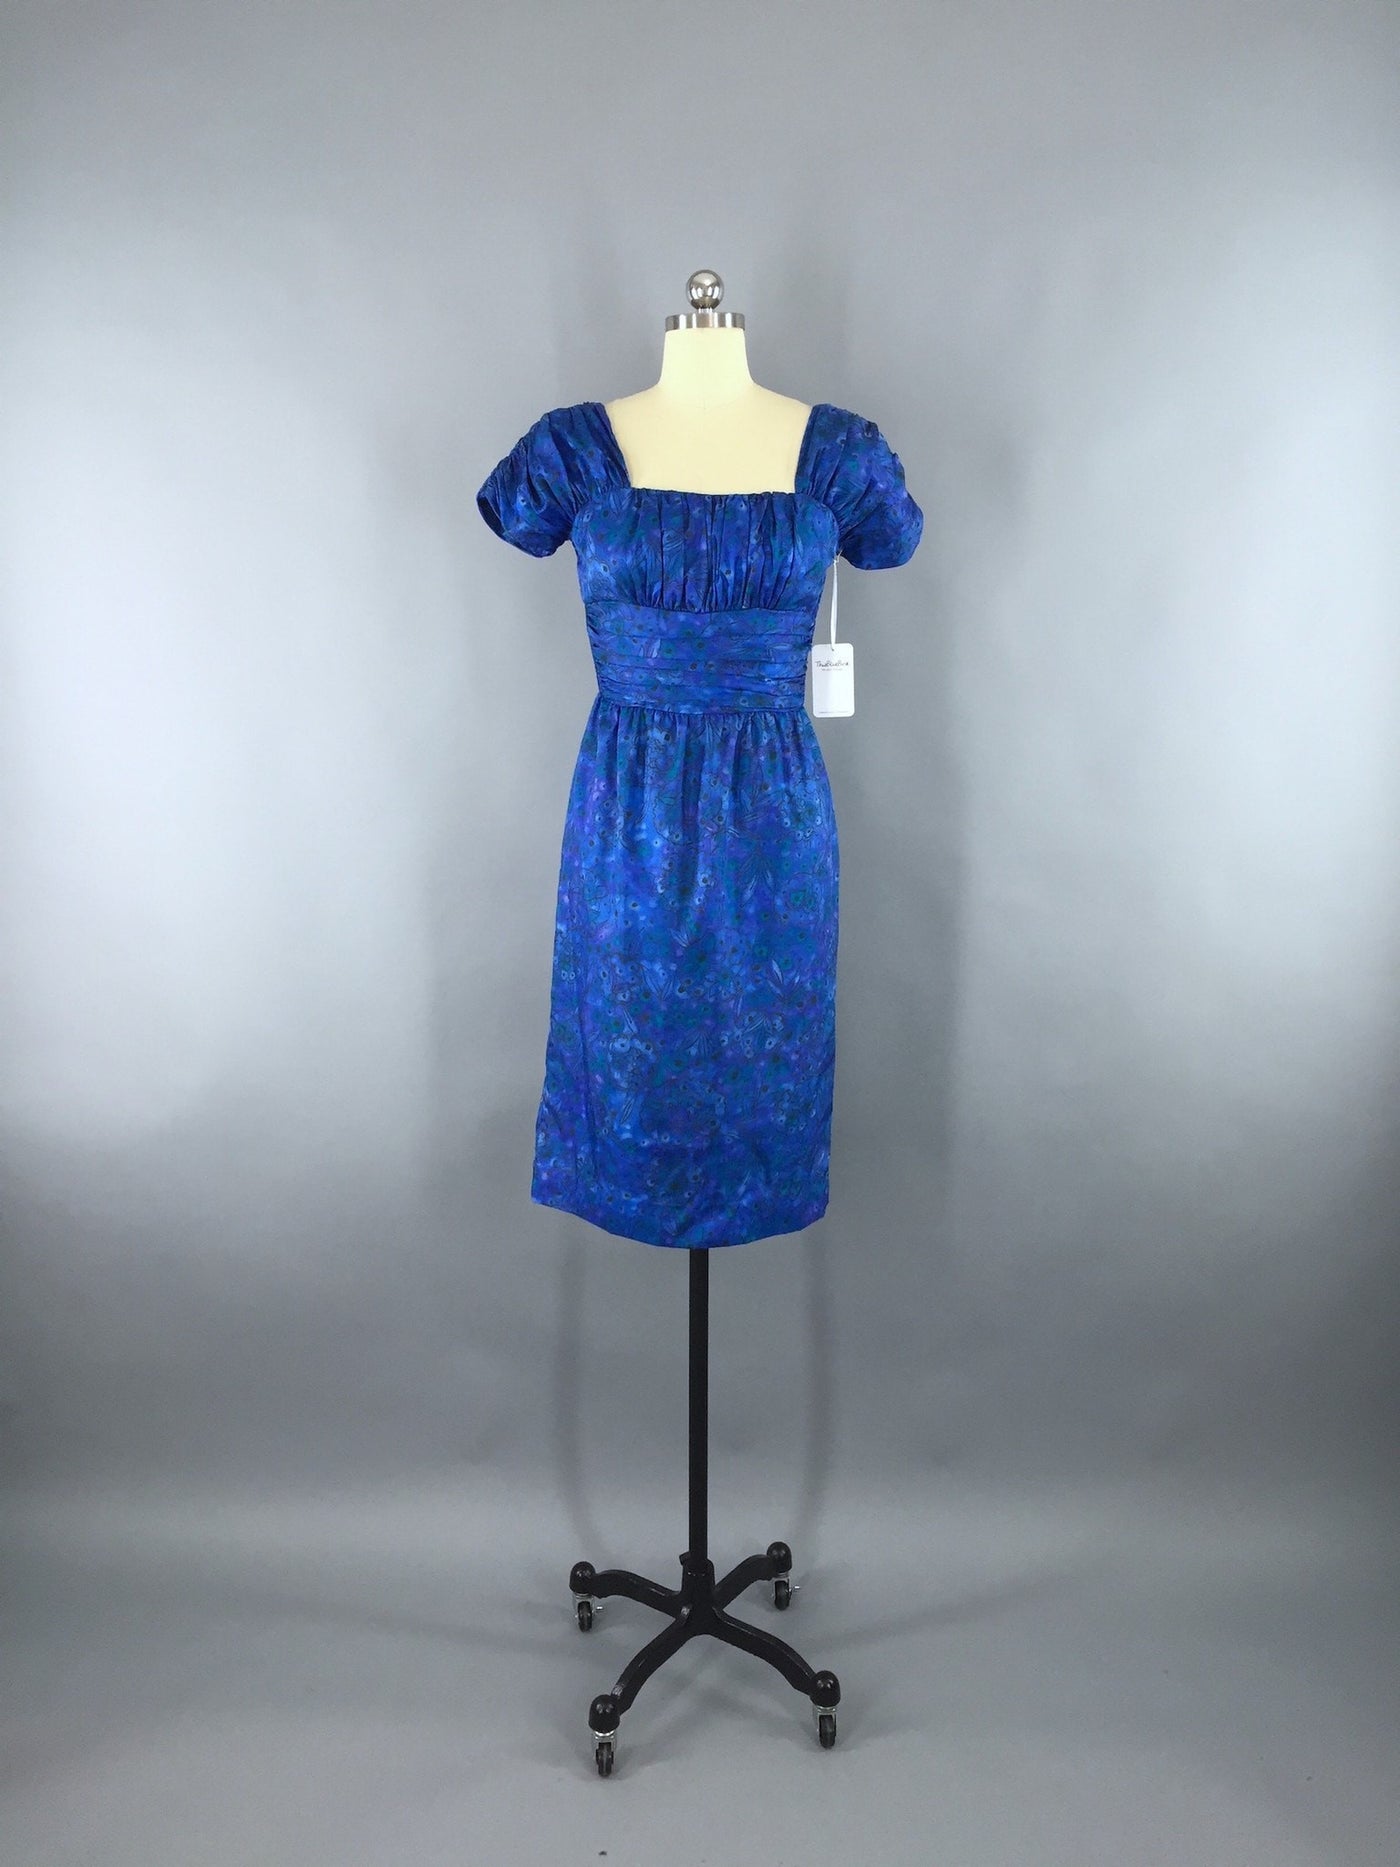 1950s Vintage Dress with Blue Floral Print - ThisBlueBird